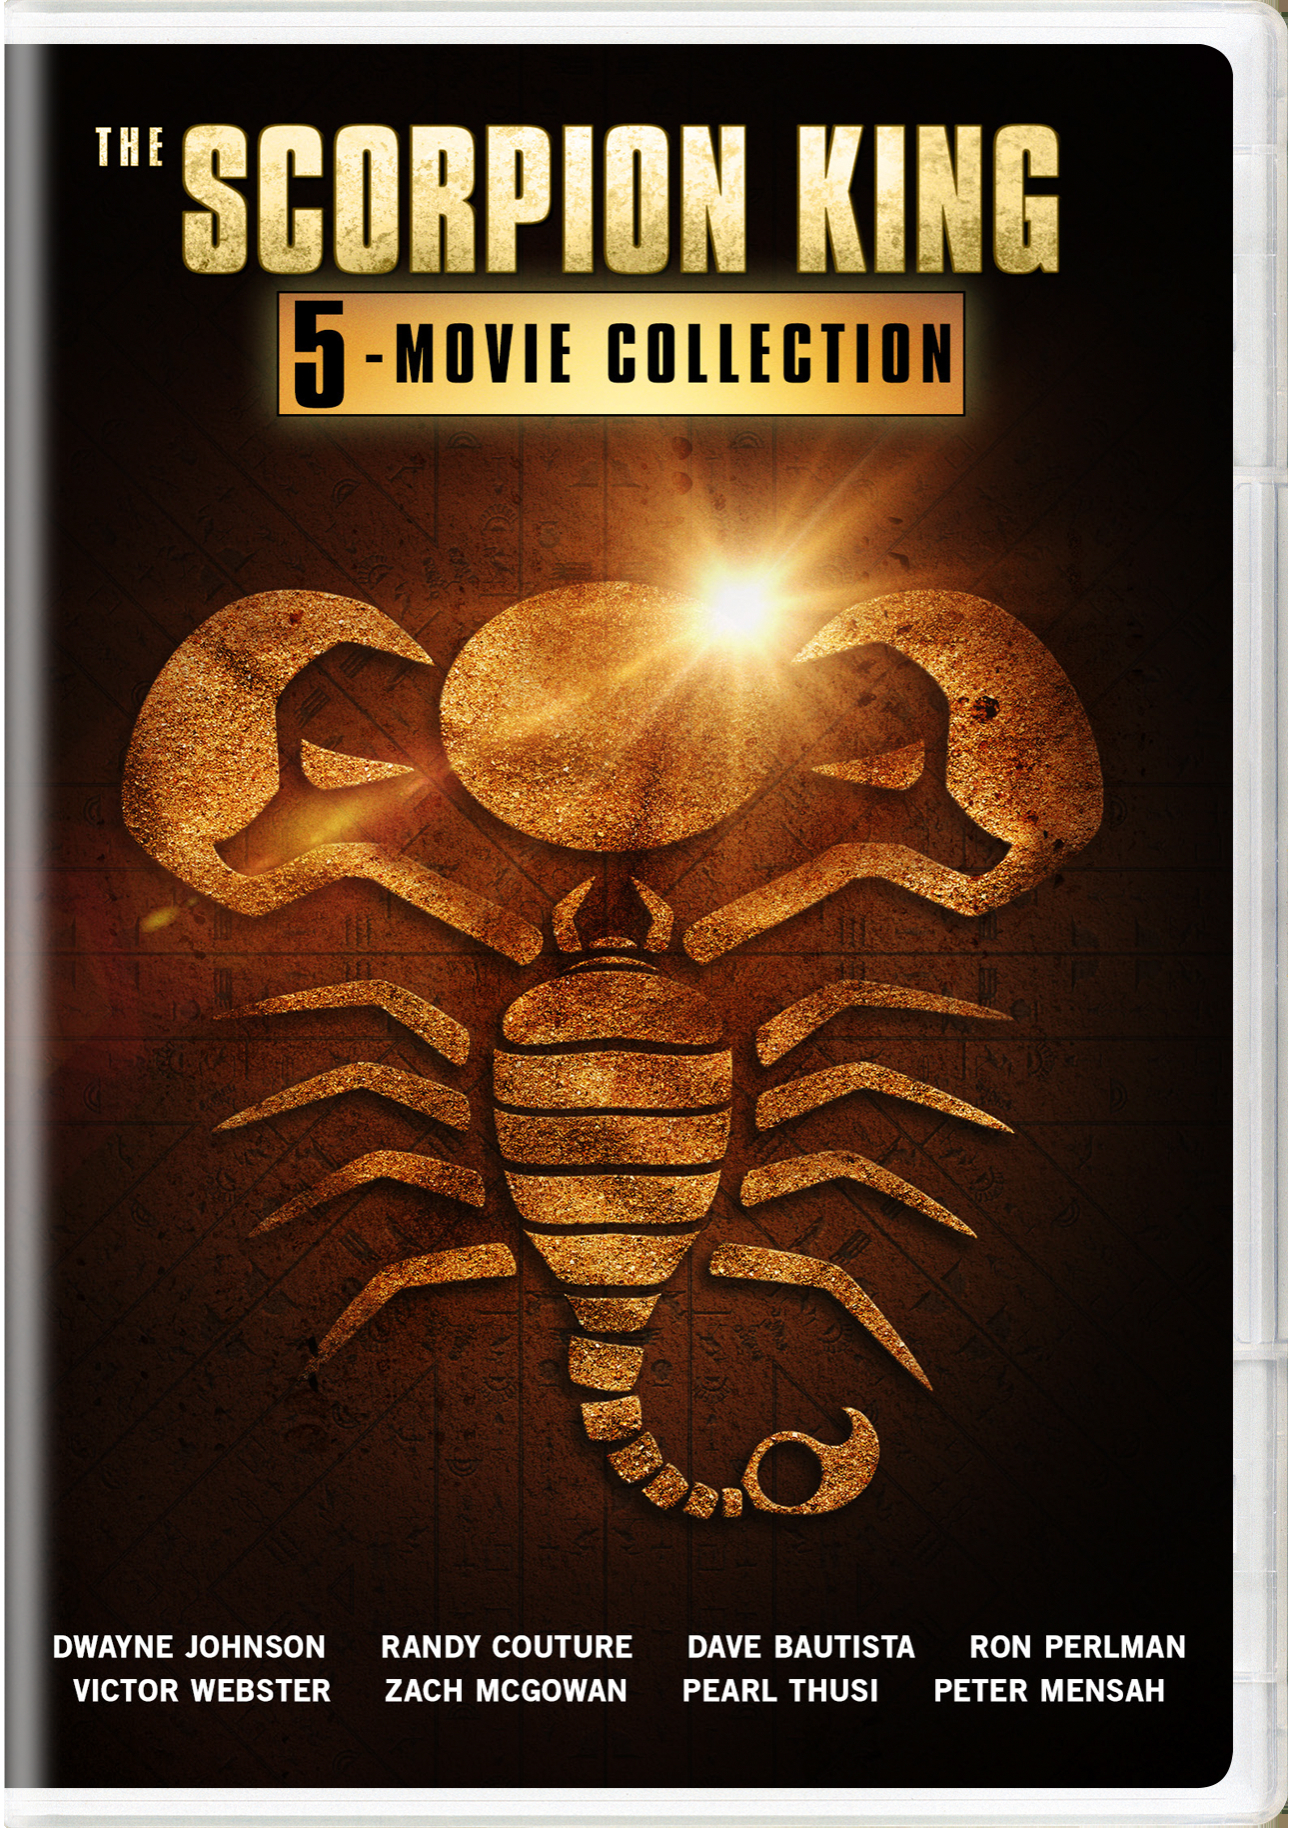 The Scorpion King: 5-movie Collection (DVD Set) - DVD [ 2018 ]  - Action Movies On DVD - Movies On GRUV